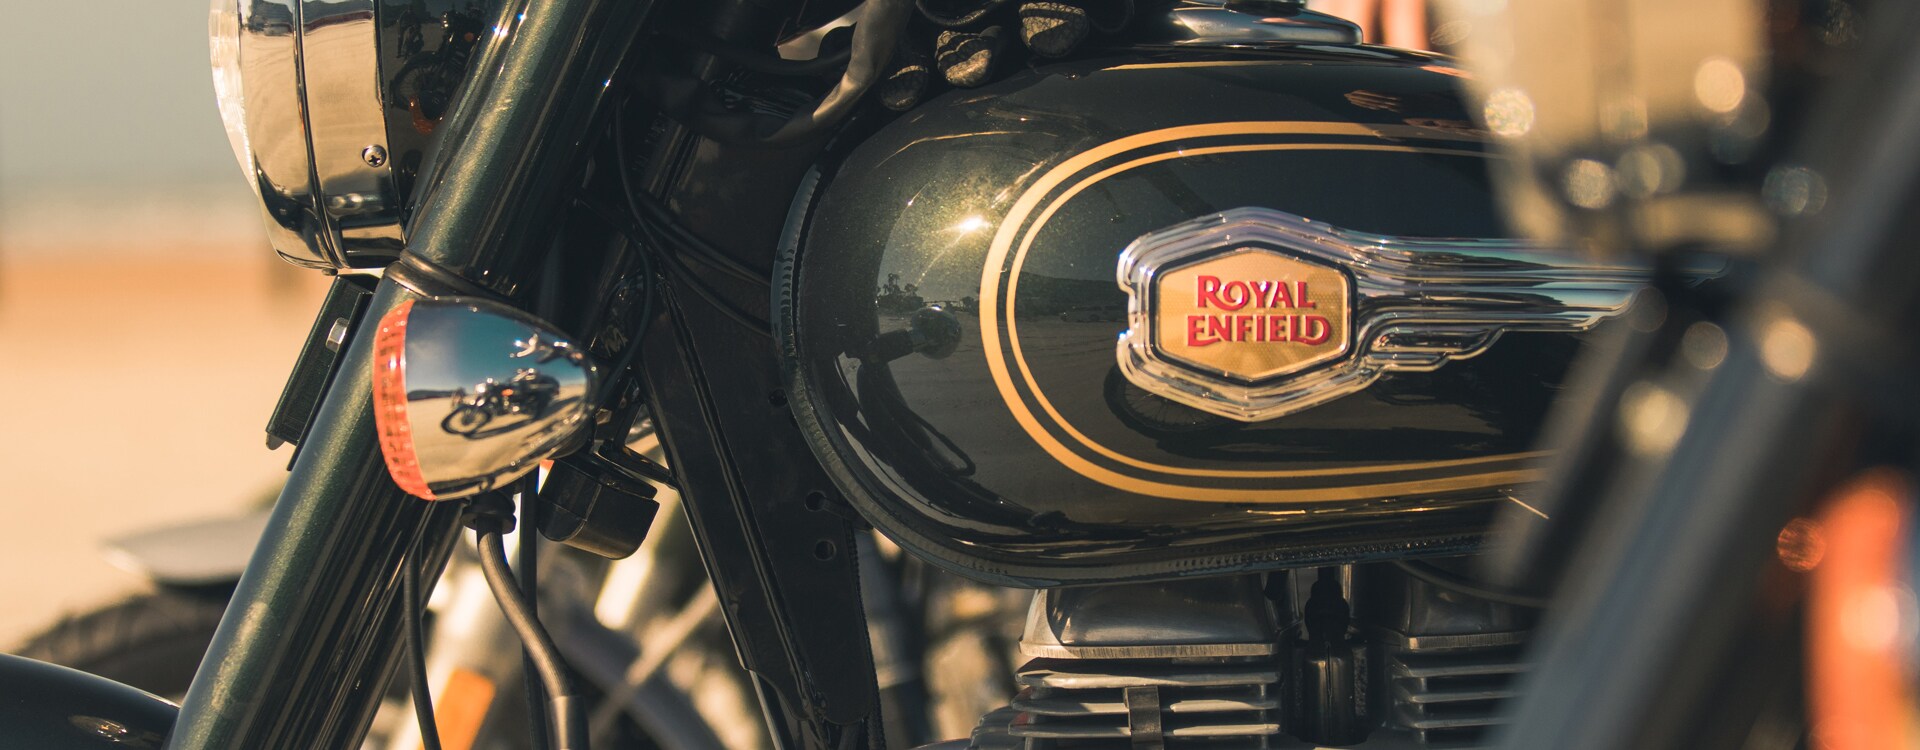 Bullet 500 - Reliability on the road